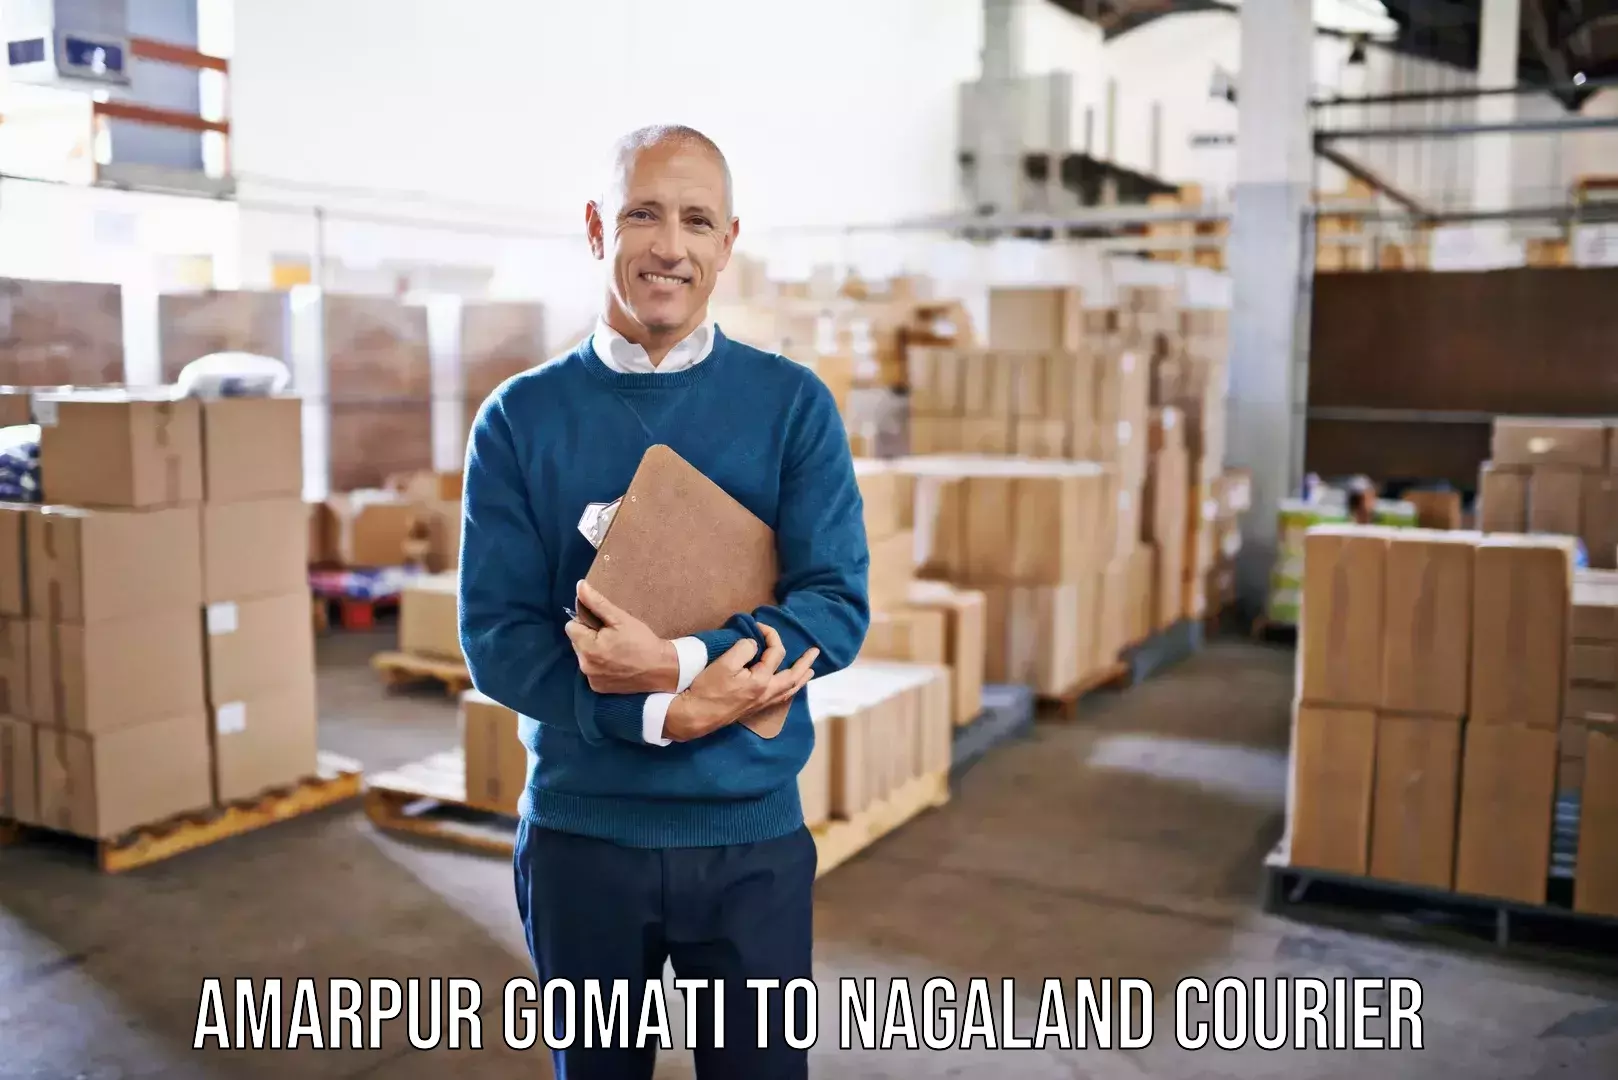 Personalized relocation plans Amarpur Gomati to Nagaland